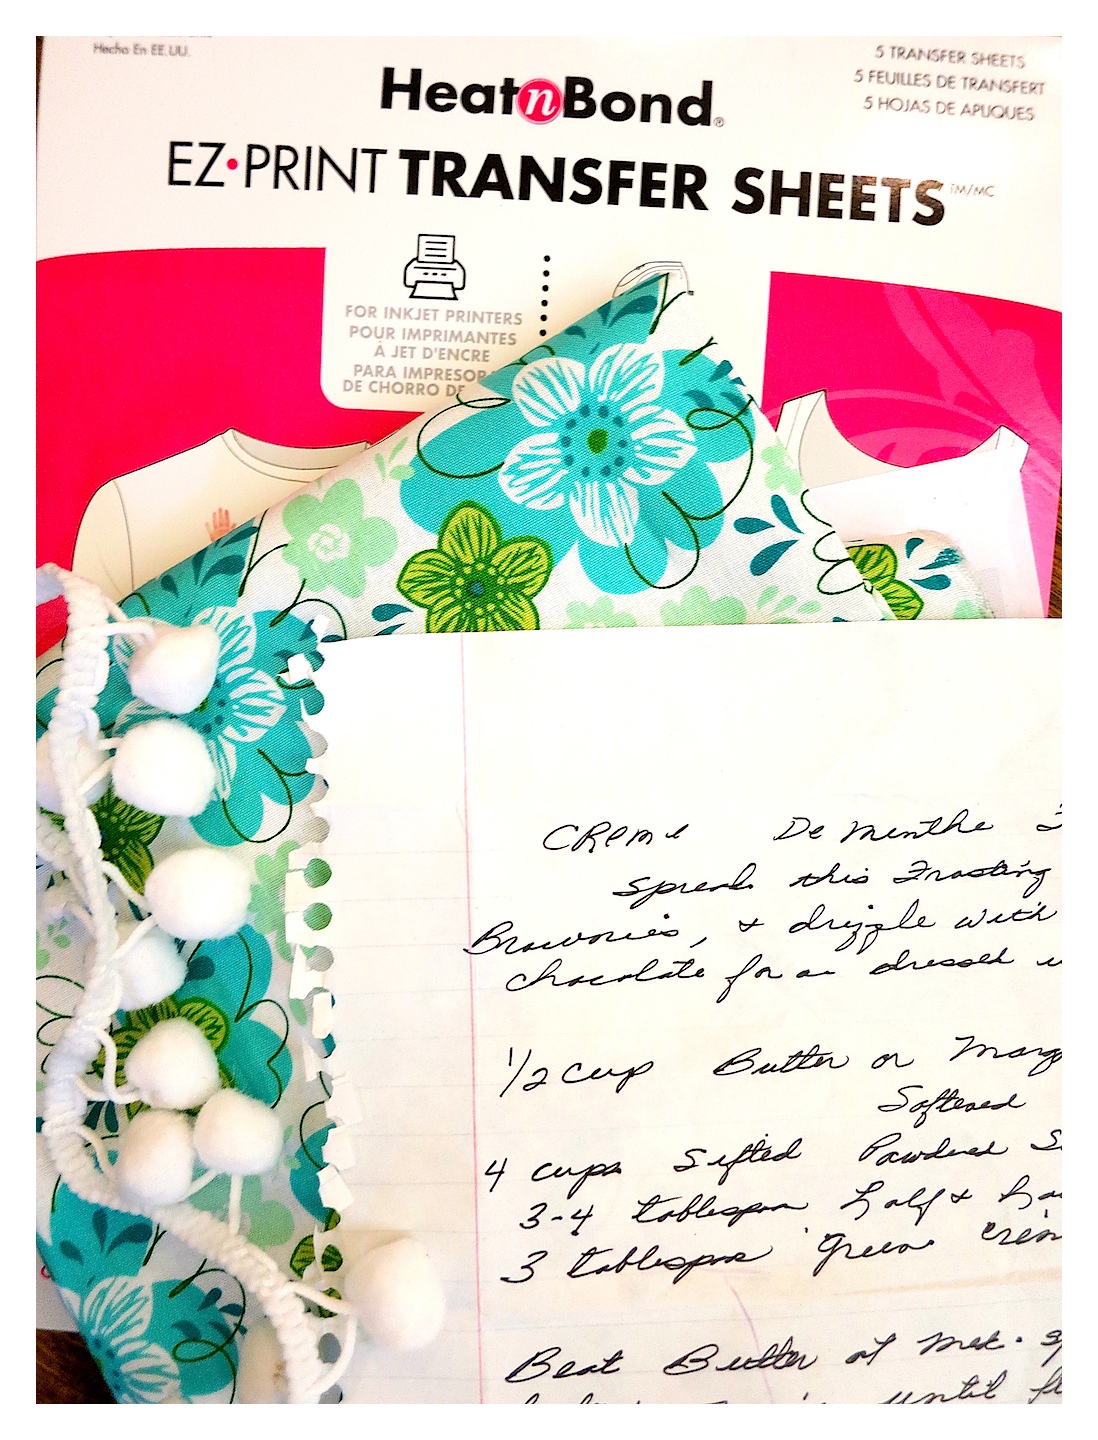 DIY Handwritten Recipe Tea Towels. Print a family recipe onto a tea towel. Great keepsake gift for Mother's Day, Birthday or Christmas. Wonderful way to share a treasured family recipe!